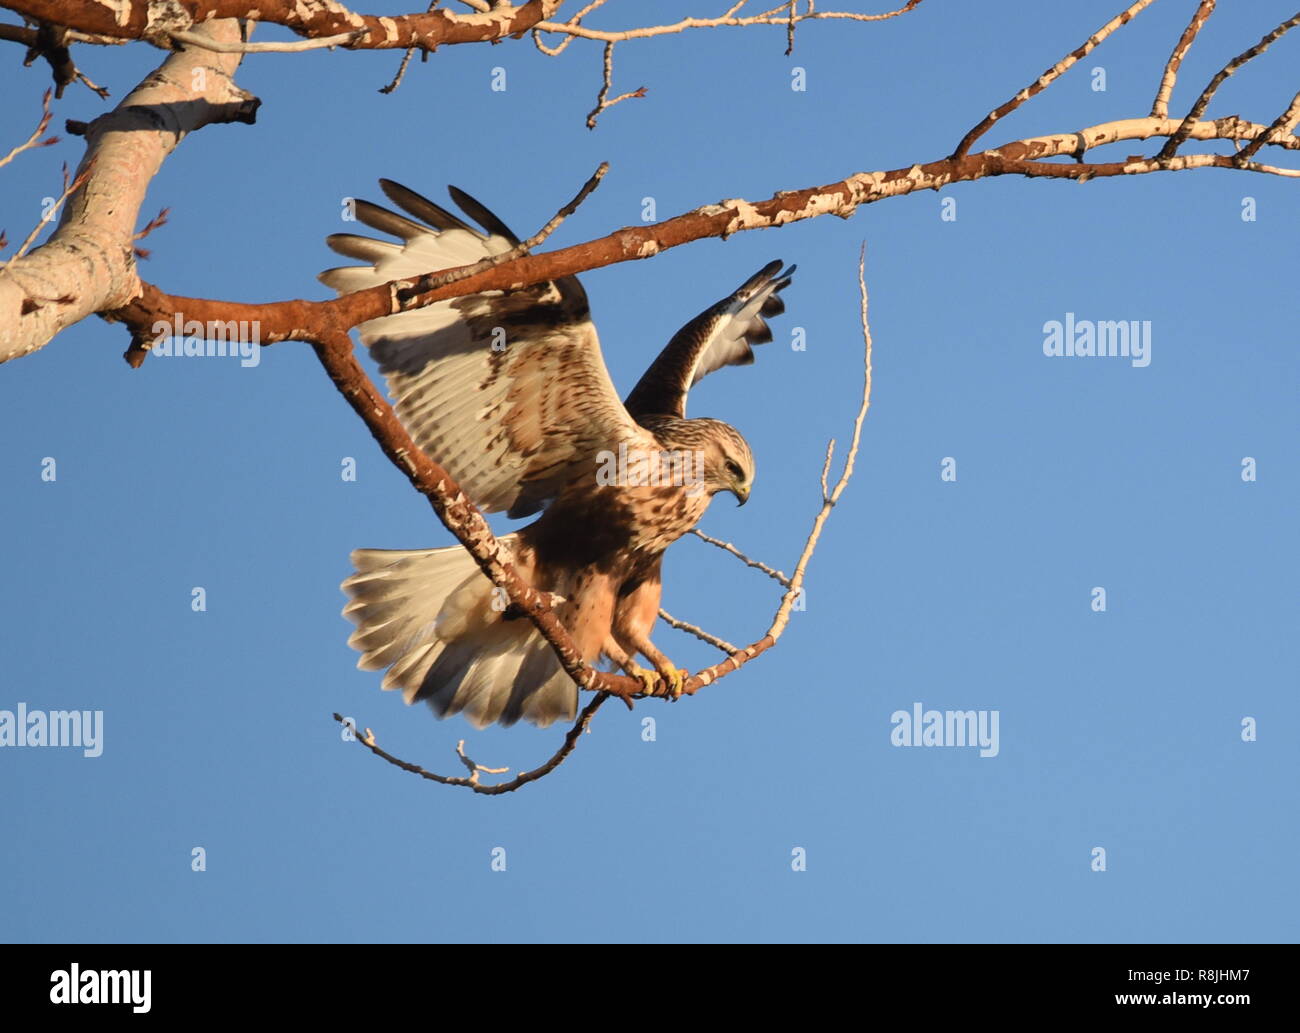 A Rough legged Hawk lands on a branch at Seedskadee National Wildlife Refuge November 15, 2018 in Sweetwater County, Wyoming. The Rough legged Hawk overwinters in Wyoming and is well adapted to harsh frigid weather. Stock Photo